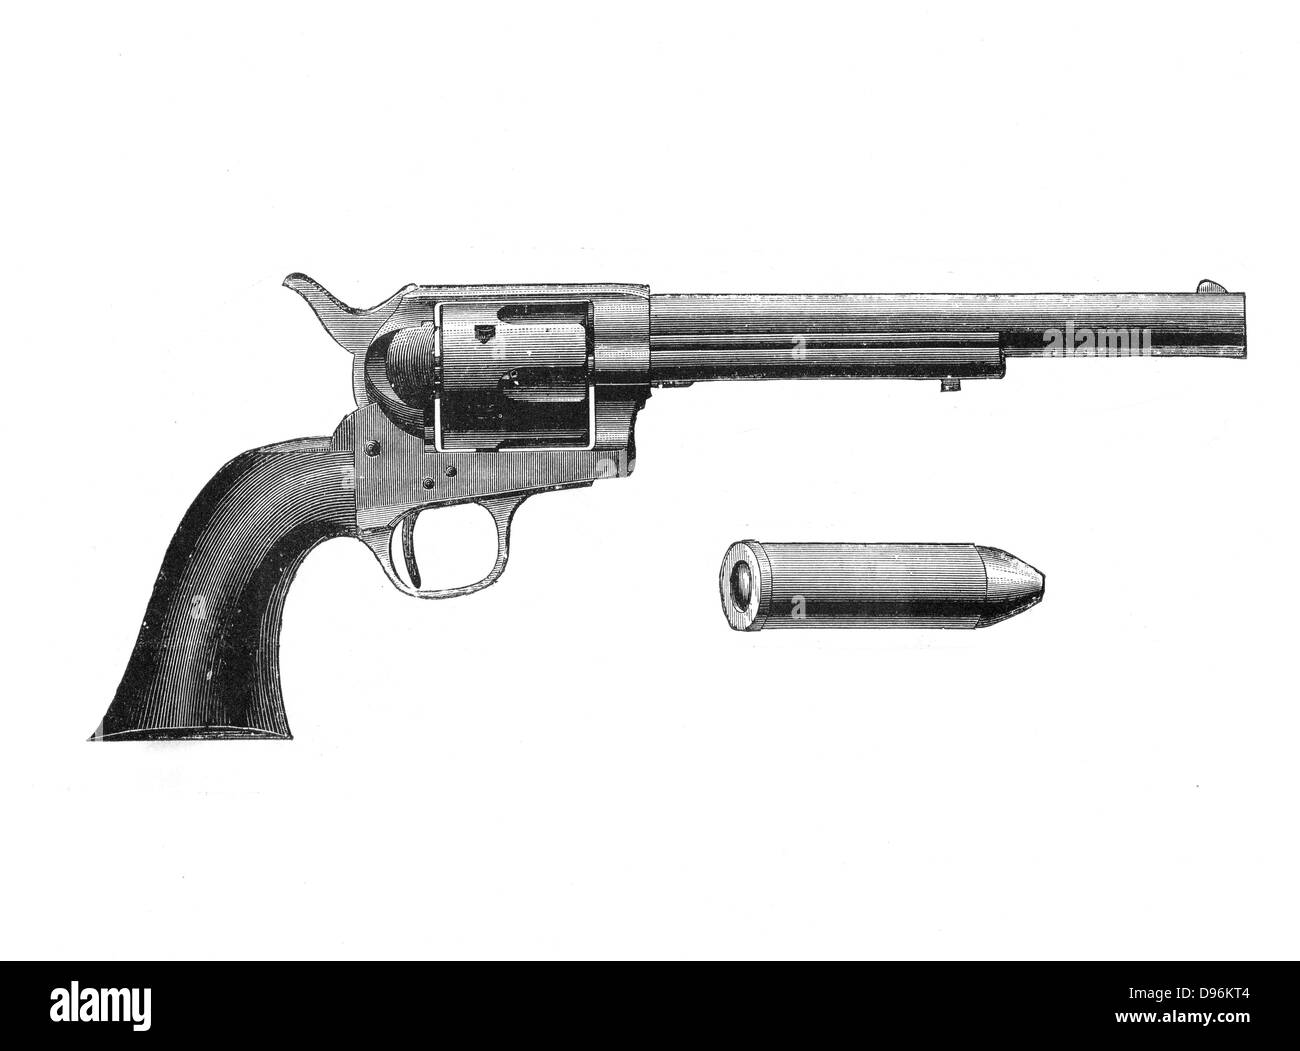 Colt 'Frontier' revolver. Also known as the Colt 'Peacemaker'.  After Mexican War of 1846-1848, was adopted by the US Army. Engraving, c 1890. Stock Photo